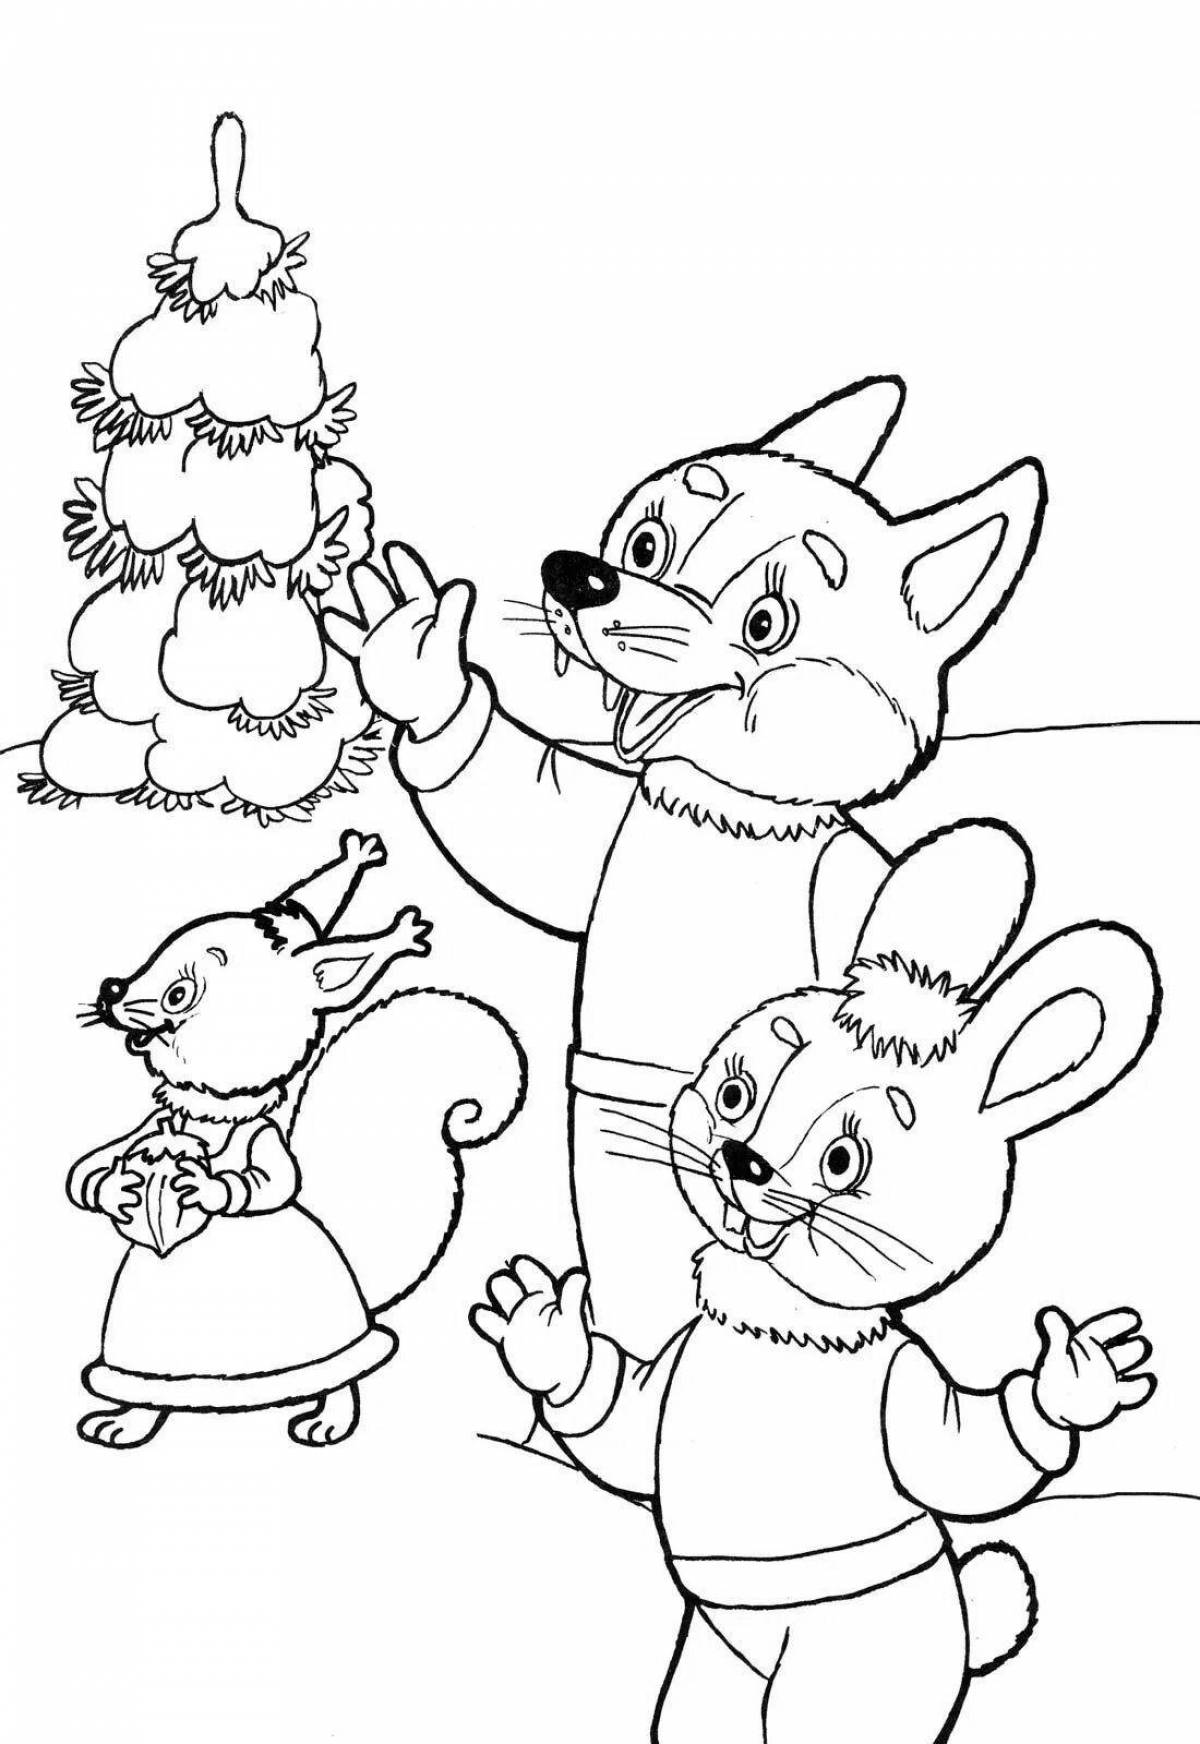 Glowing winter animals coloring book